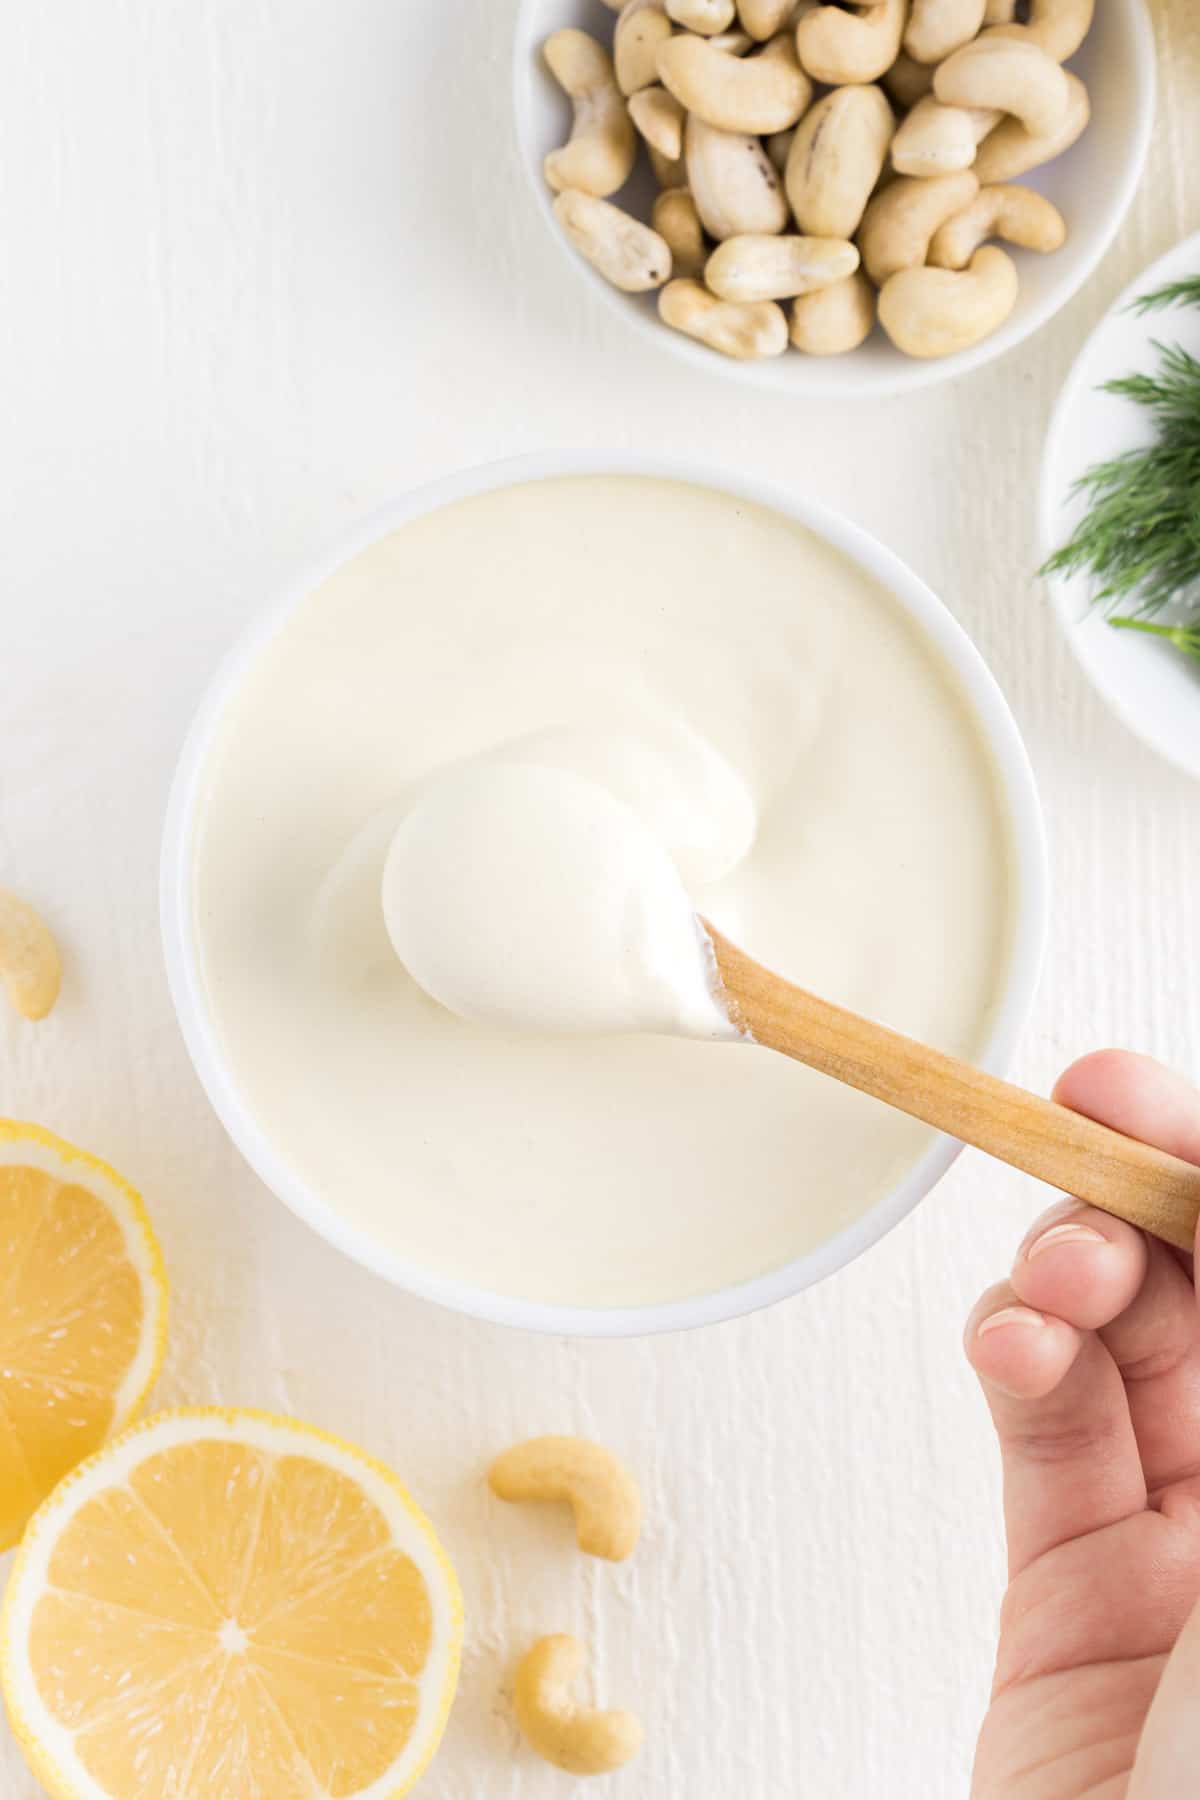 a hand holding a wooden spoon scooping vegan cashew sour cream out of a white bowl